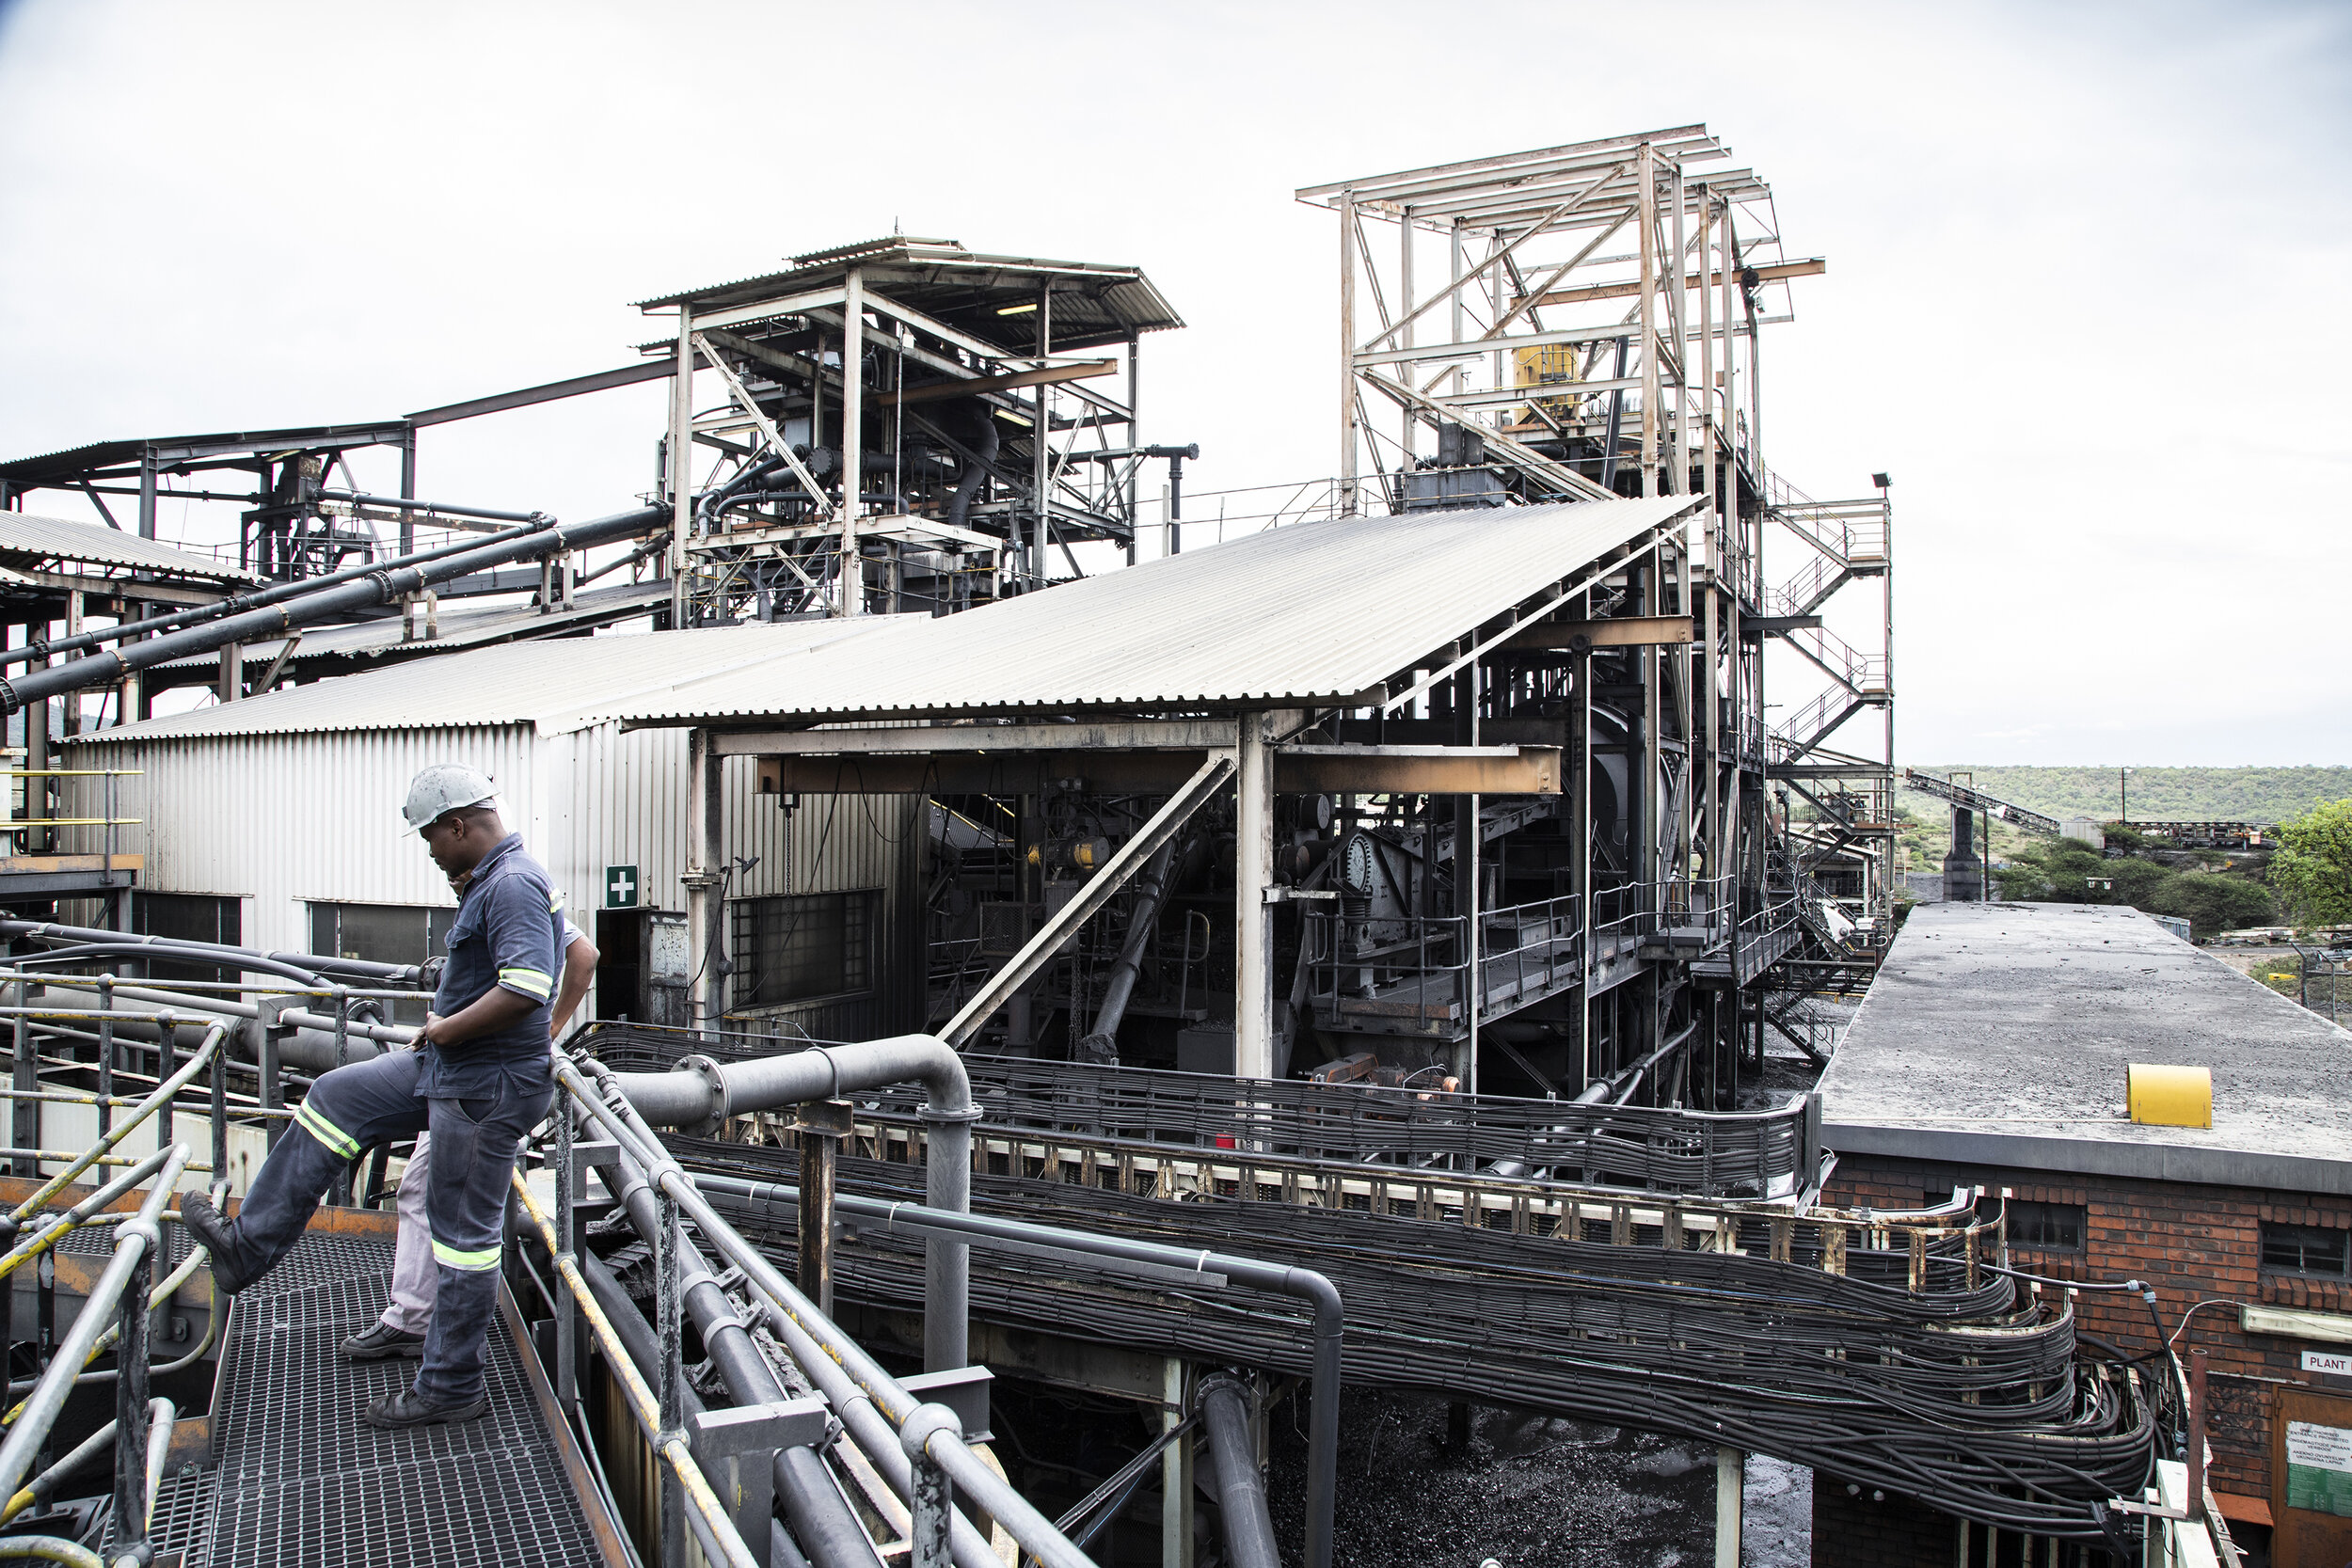 ZAC Zululand Anthracite Colliery, February 2019_duanedaws_MG_4855.jpg